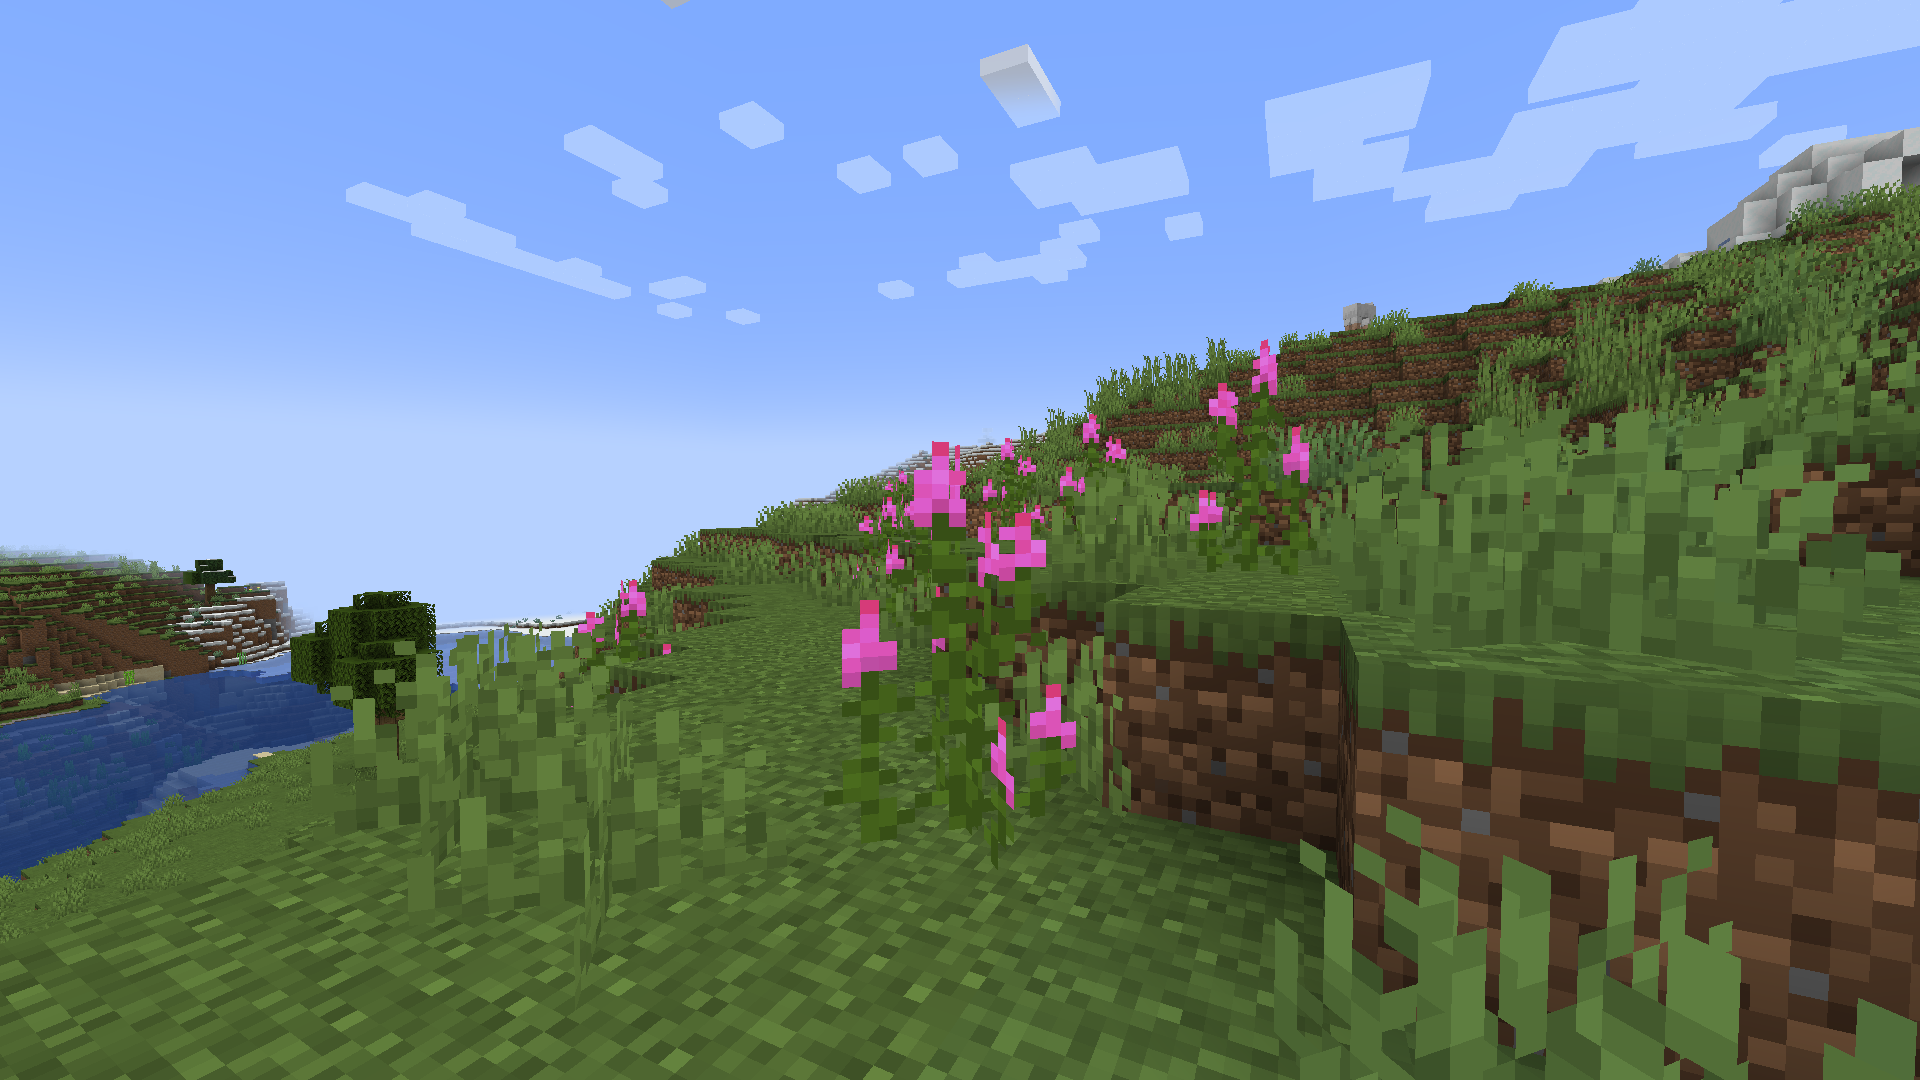 Fireweed in a plains biome (2.0)